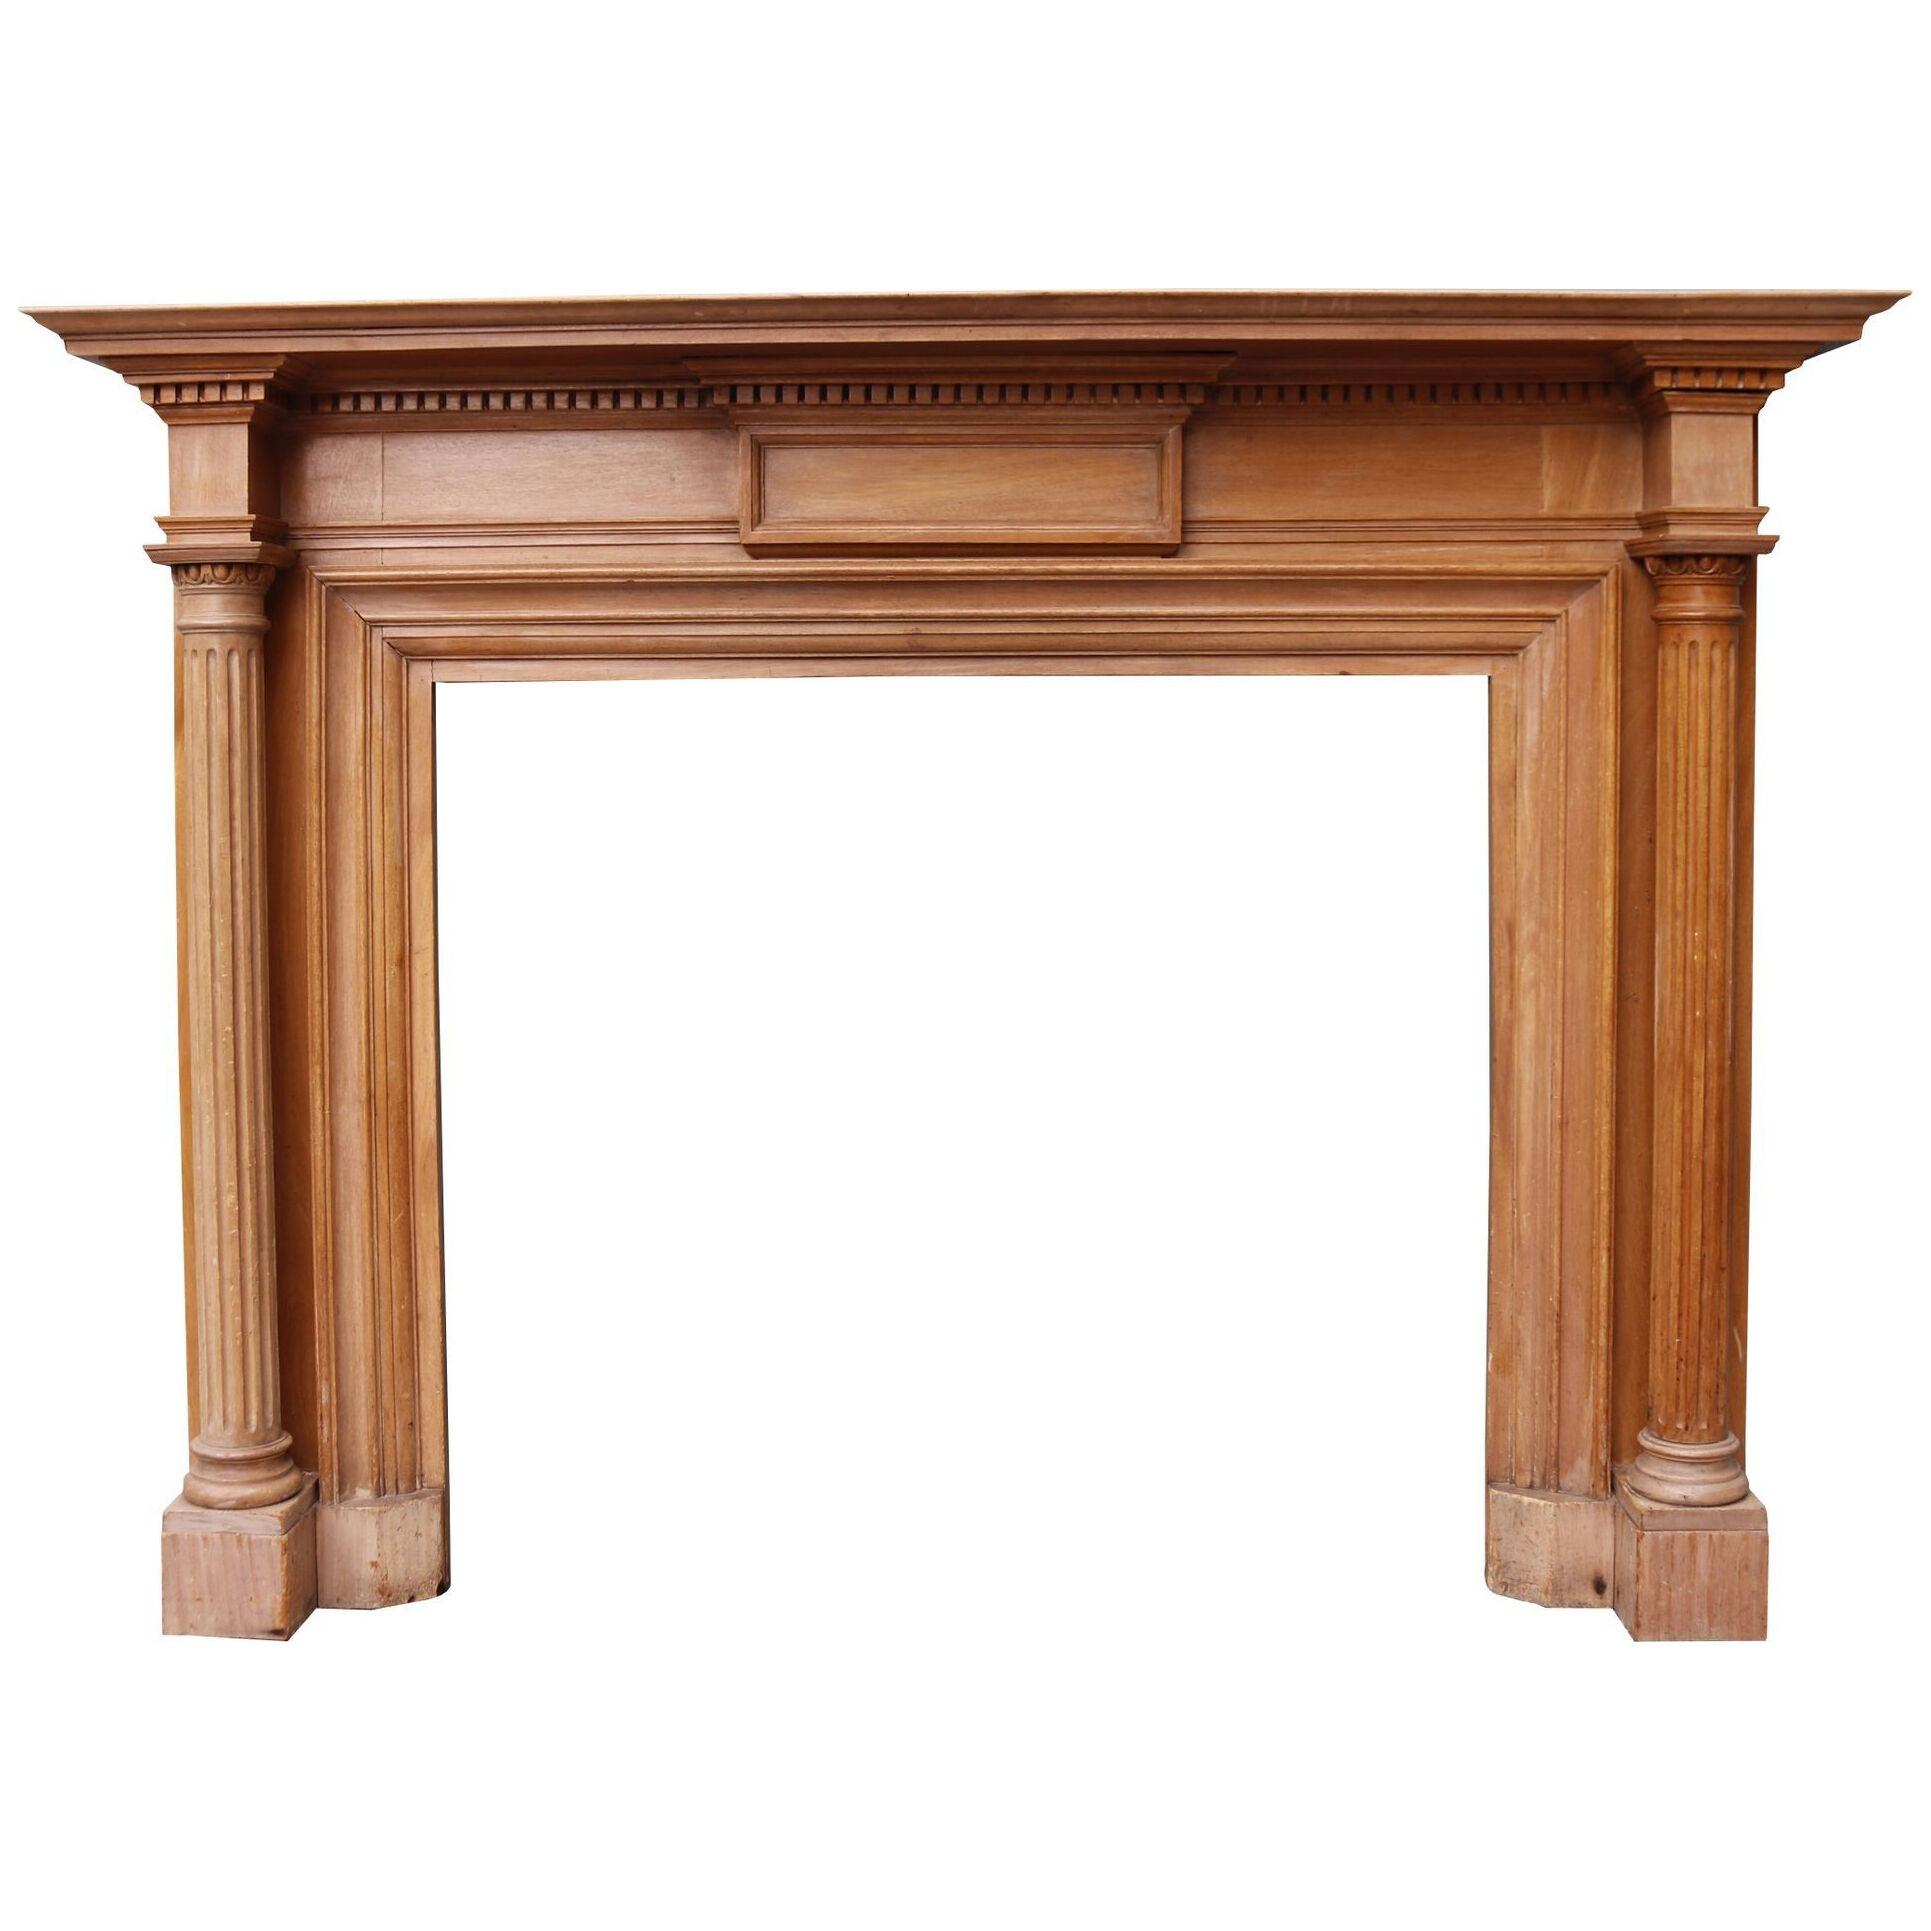 Neoclassical Columned Timber Fireplace